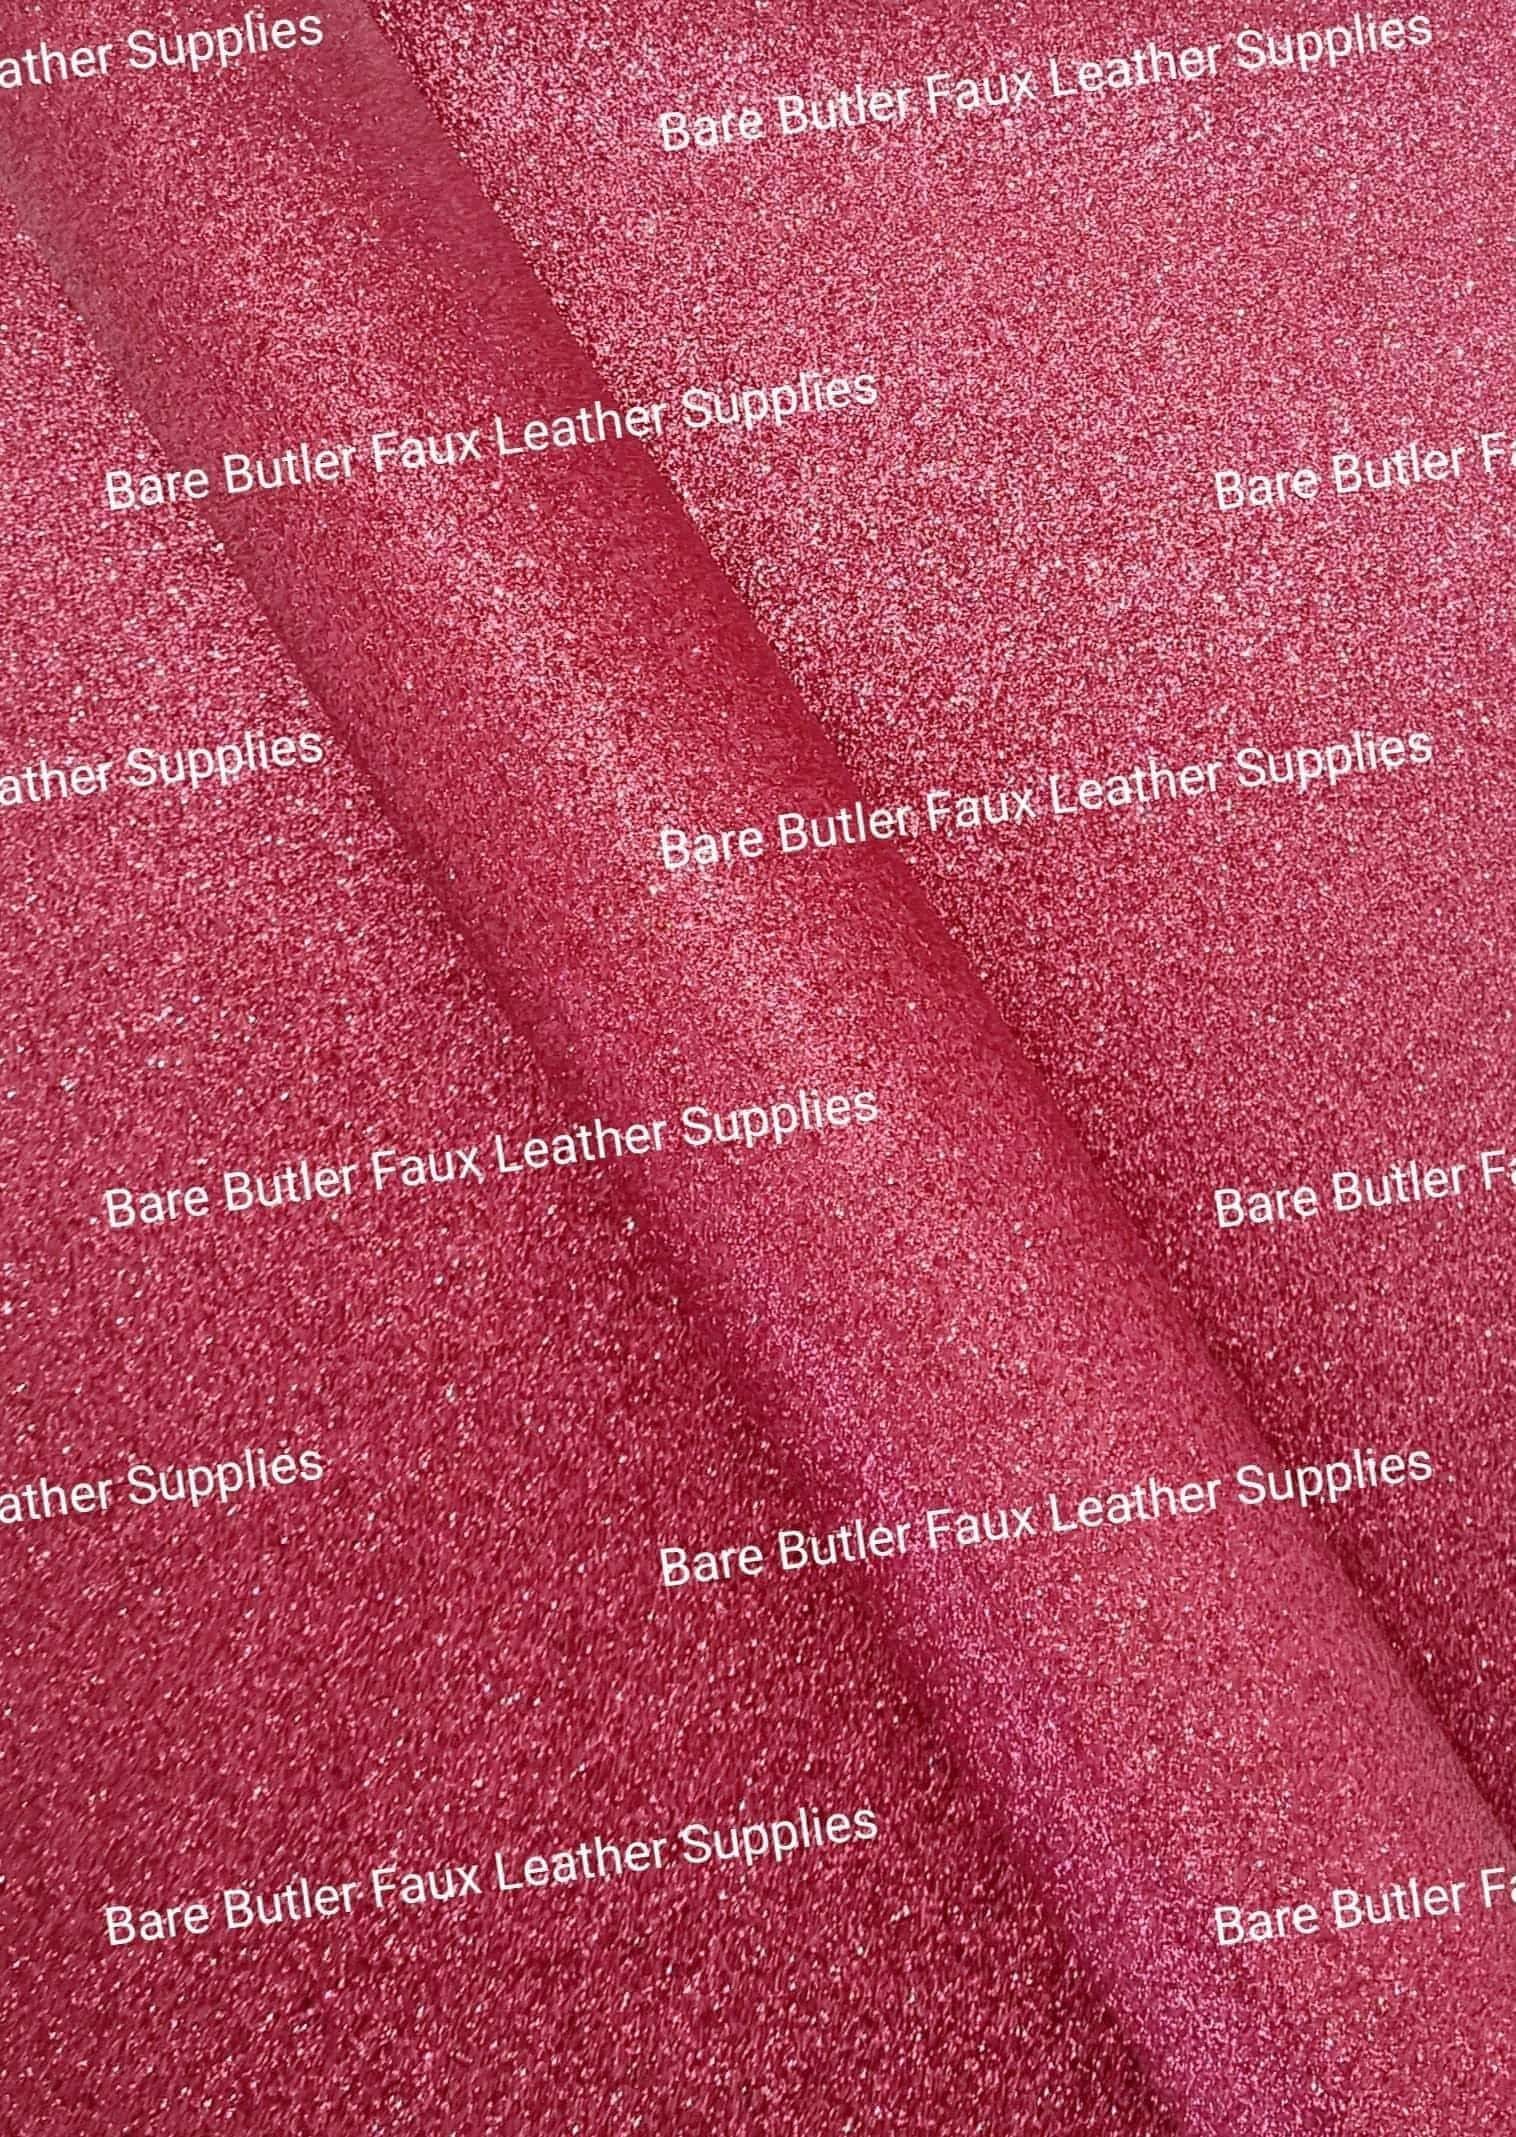 Glitter - Ruby Rose - Berry, Faux, Faux Leather, Fine, Glitter, Leather, leatherette, Super - Bare Butler Faux Leather Supplies 